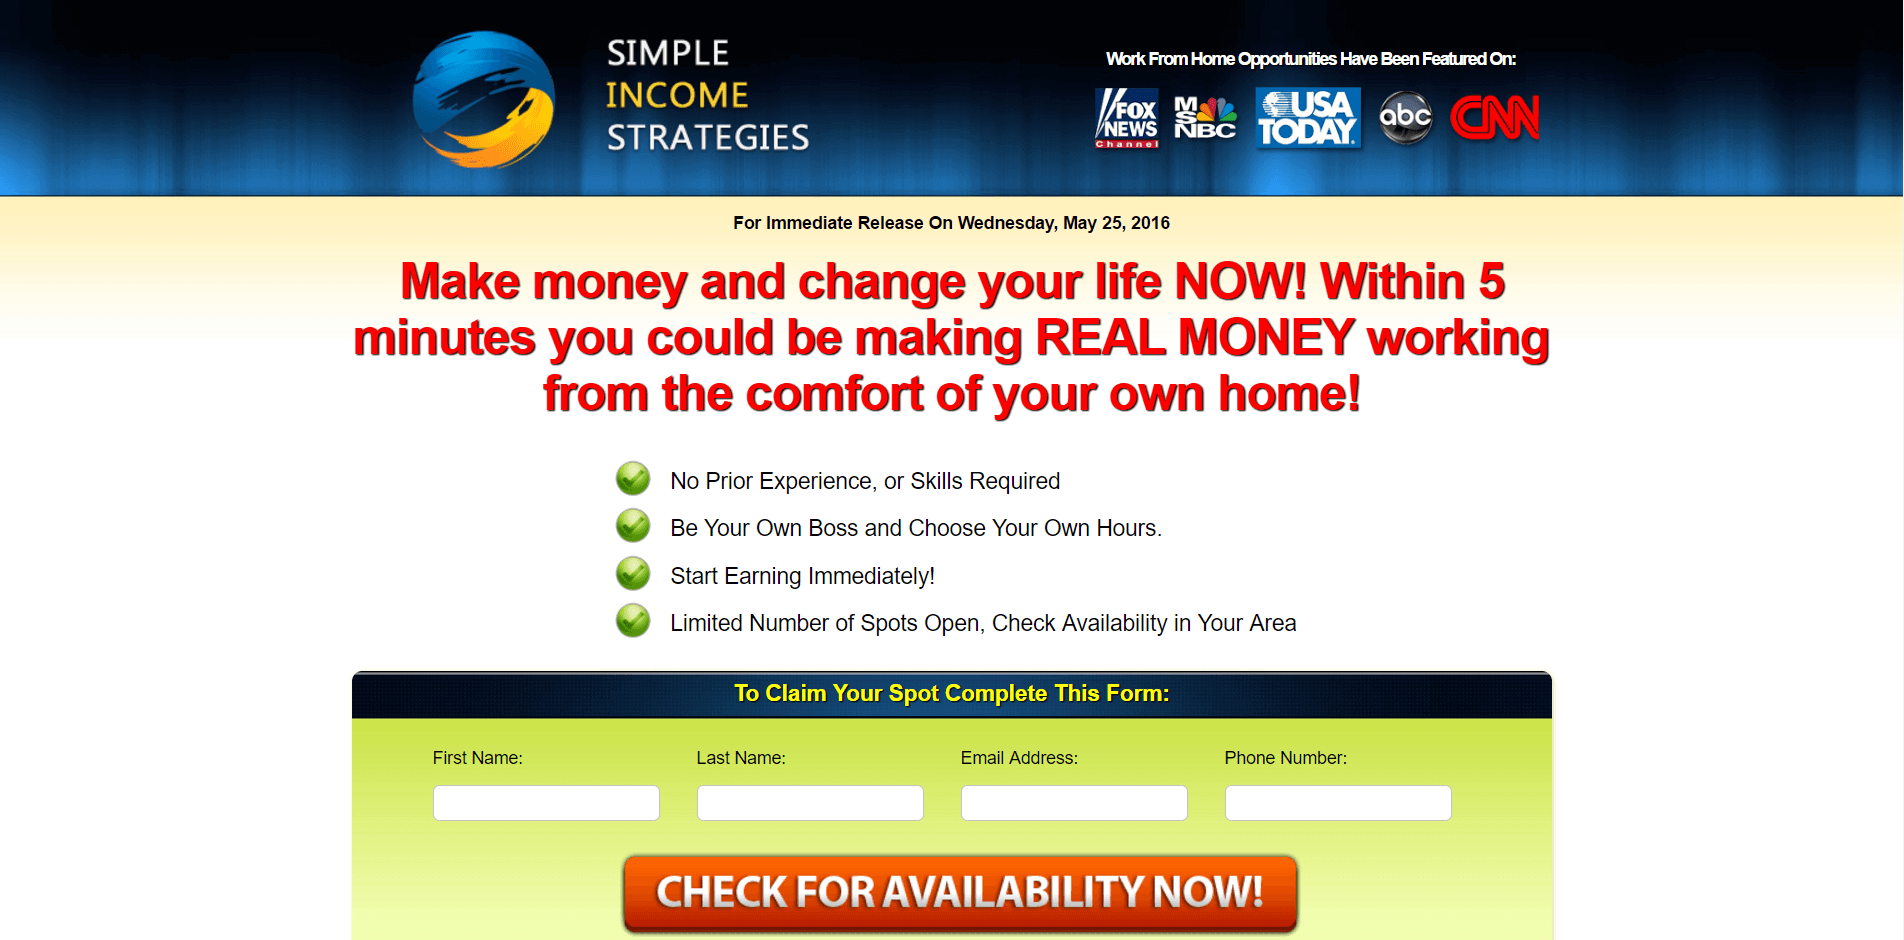 Simple Income Strategies